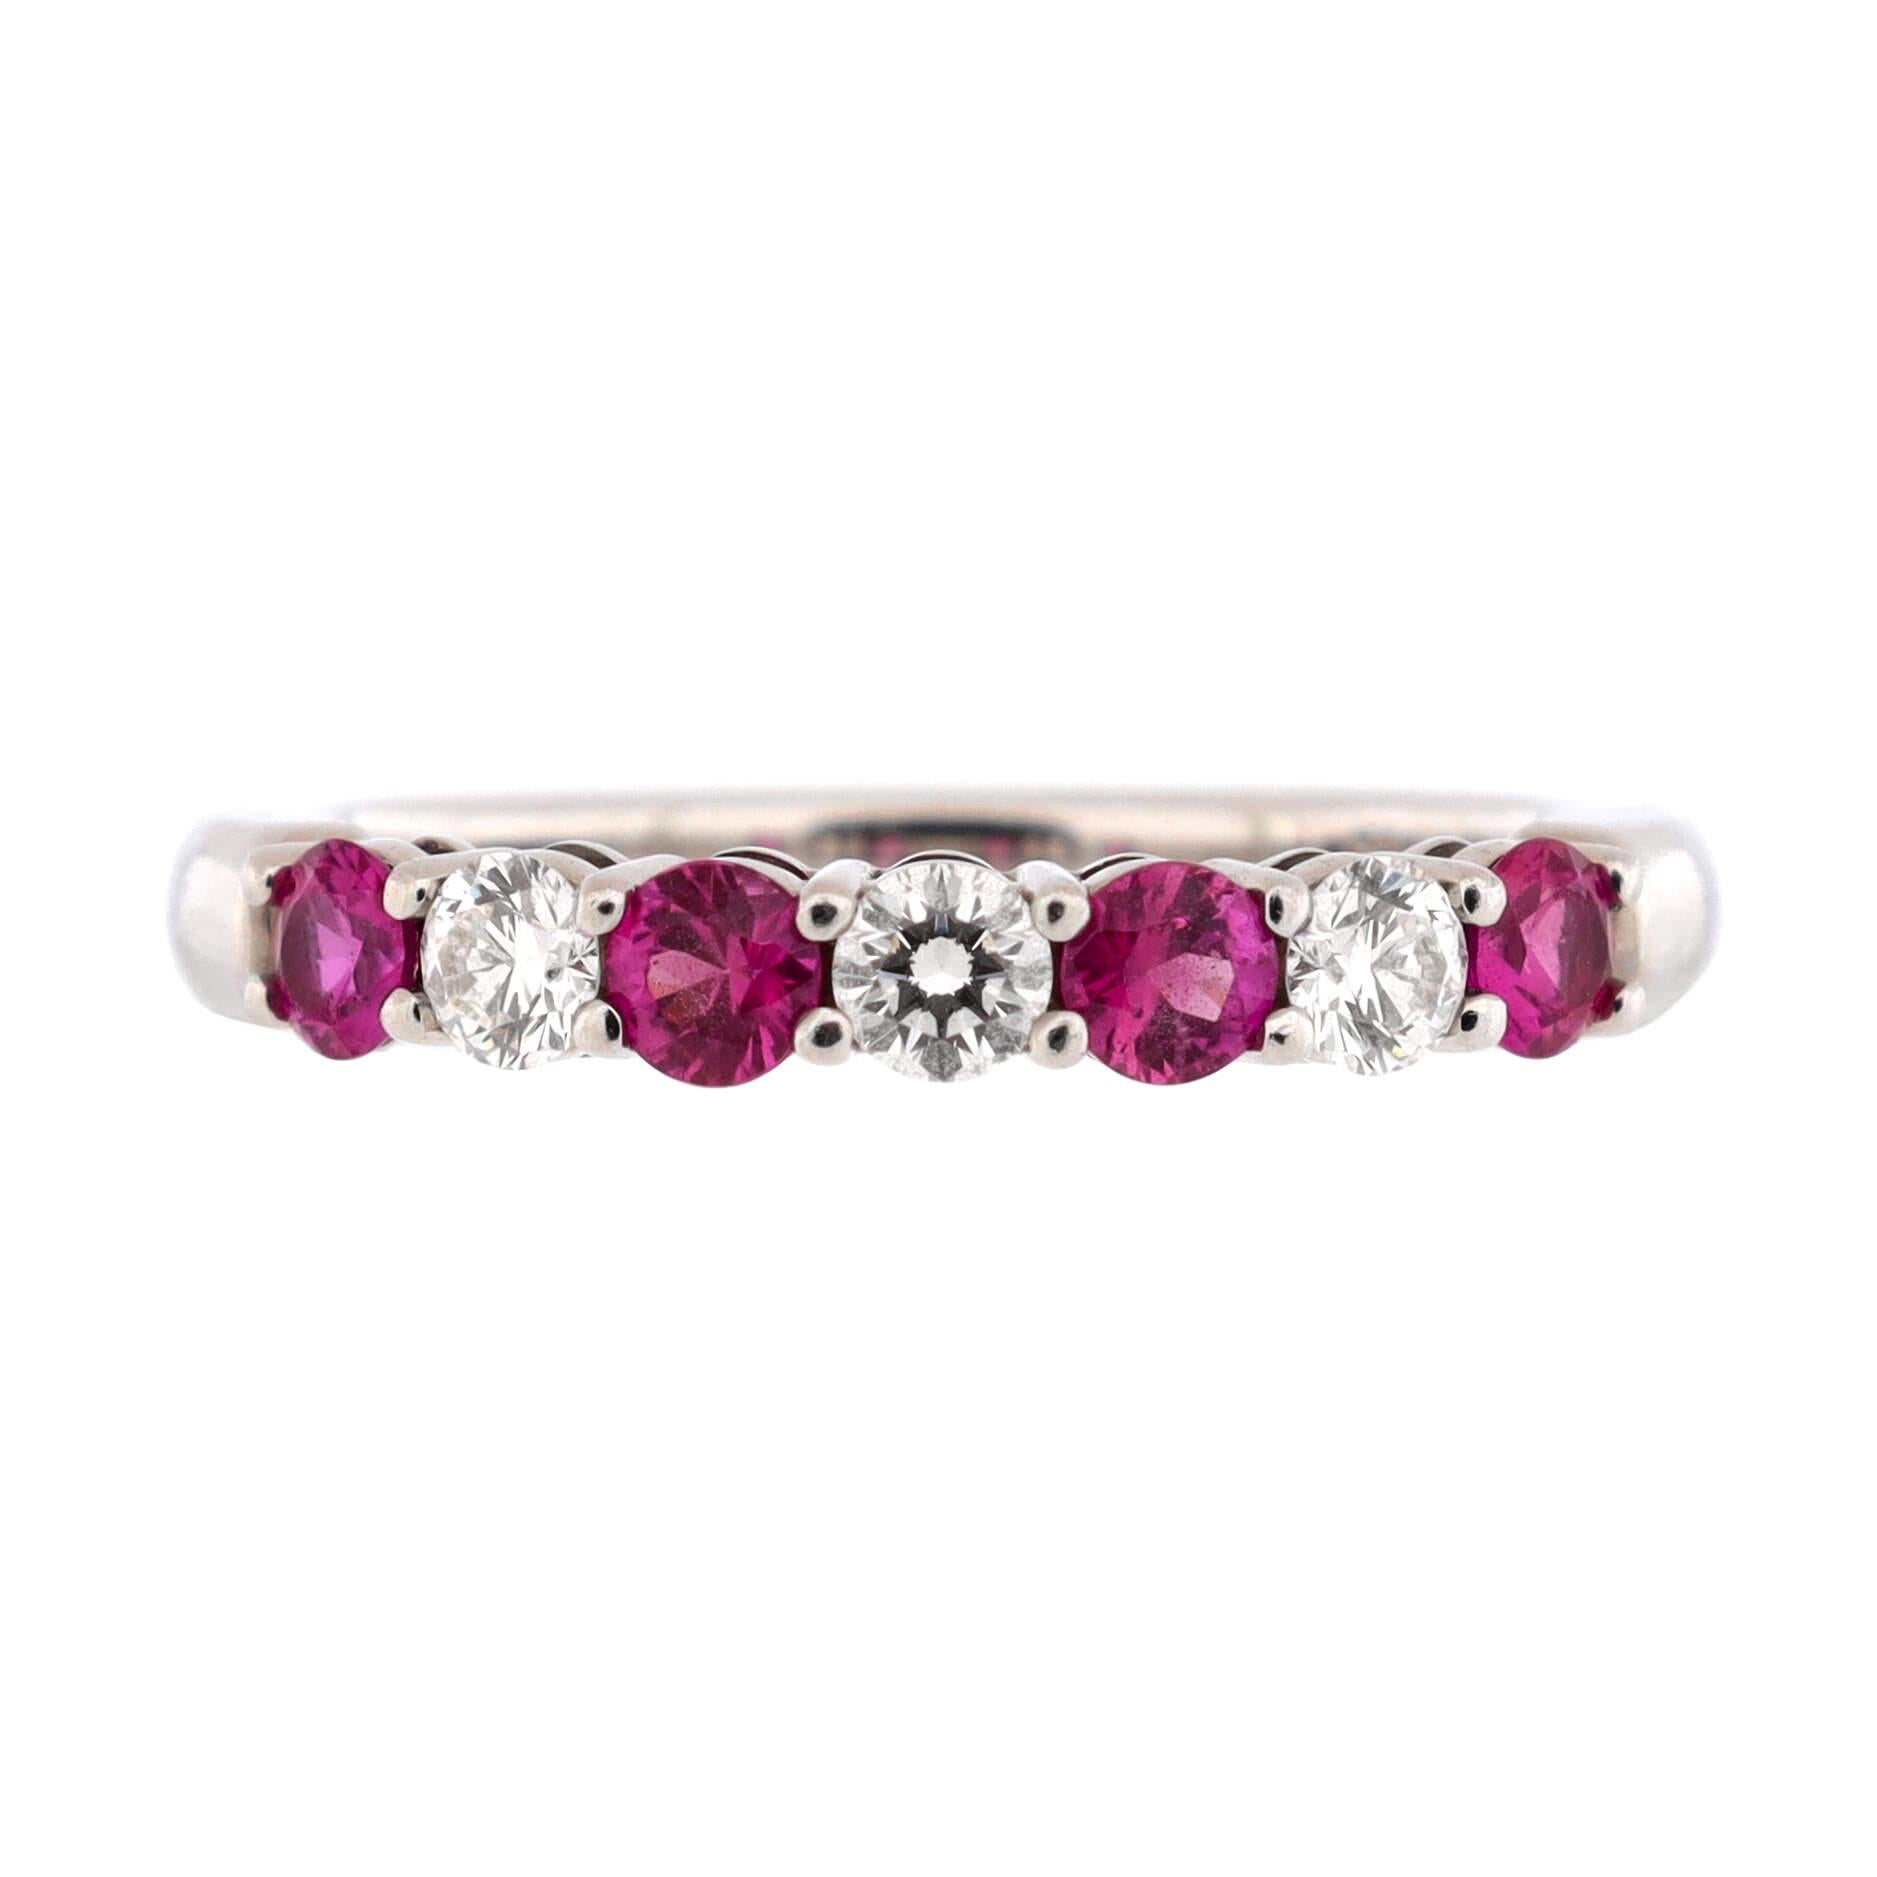 Condition: Very good. Moderate wear throughout.
Accessories: No Accessories
Measurements: Size: 6, Width: 2.20 mm
Designer: Tiffany & Co.
Model: Half Embrace Band Ring Platinum with Diamonds and Pink Sapphires 3mm
Exterior Color: Silver
Item Number: